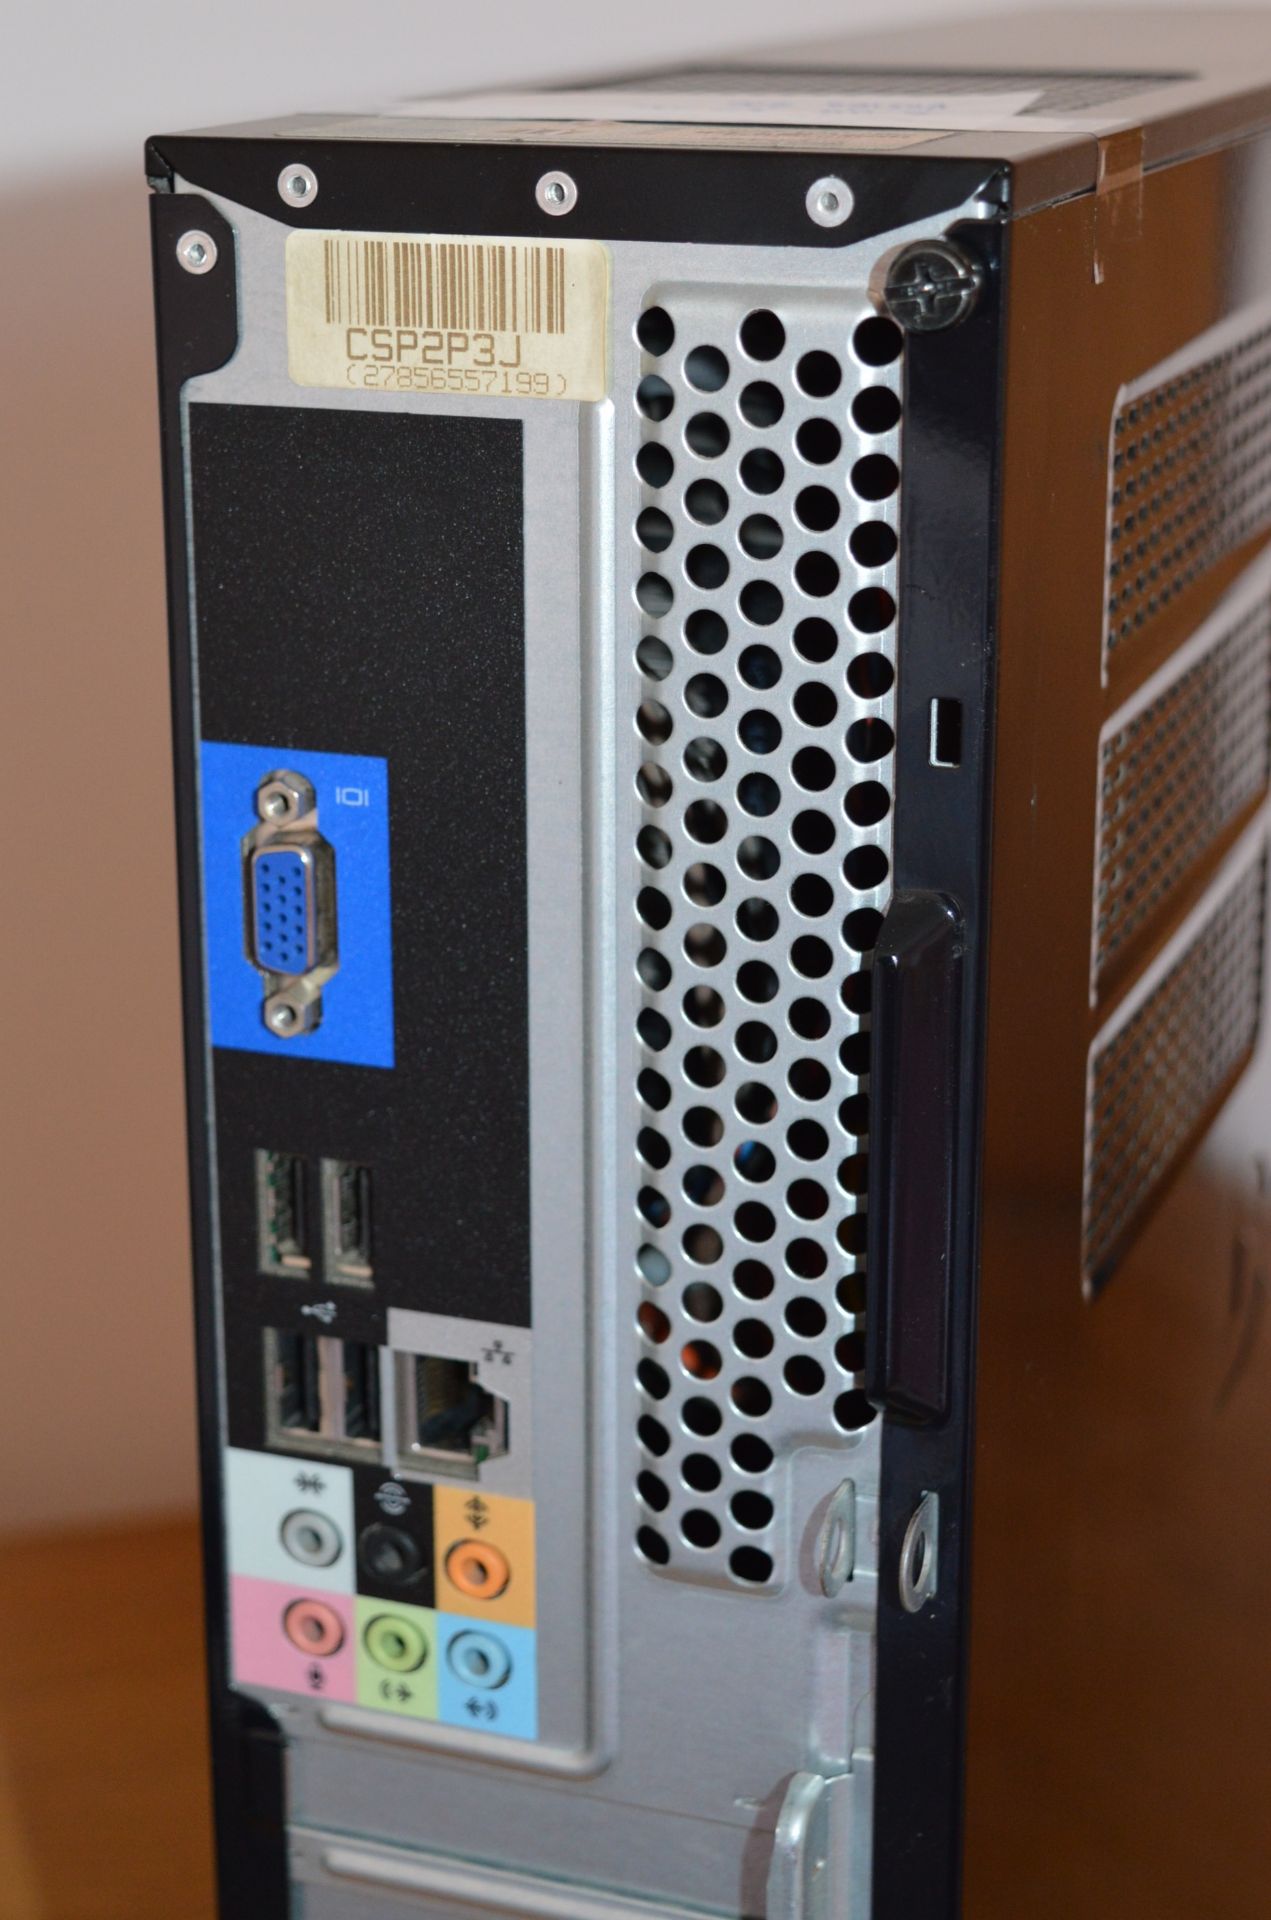 1 x Dell Vostro 220 Desktop Computer - Features Intel 2.0ghz Dual Core Processor, 2gb Ram and DVD - Image 2 of 2